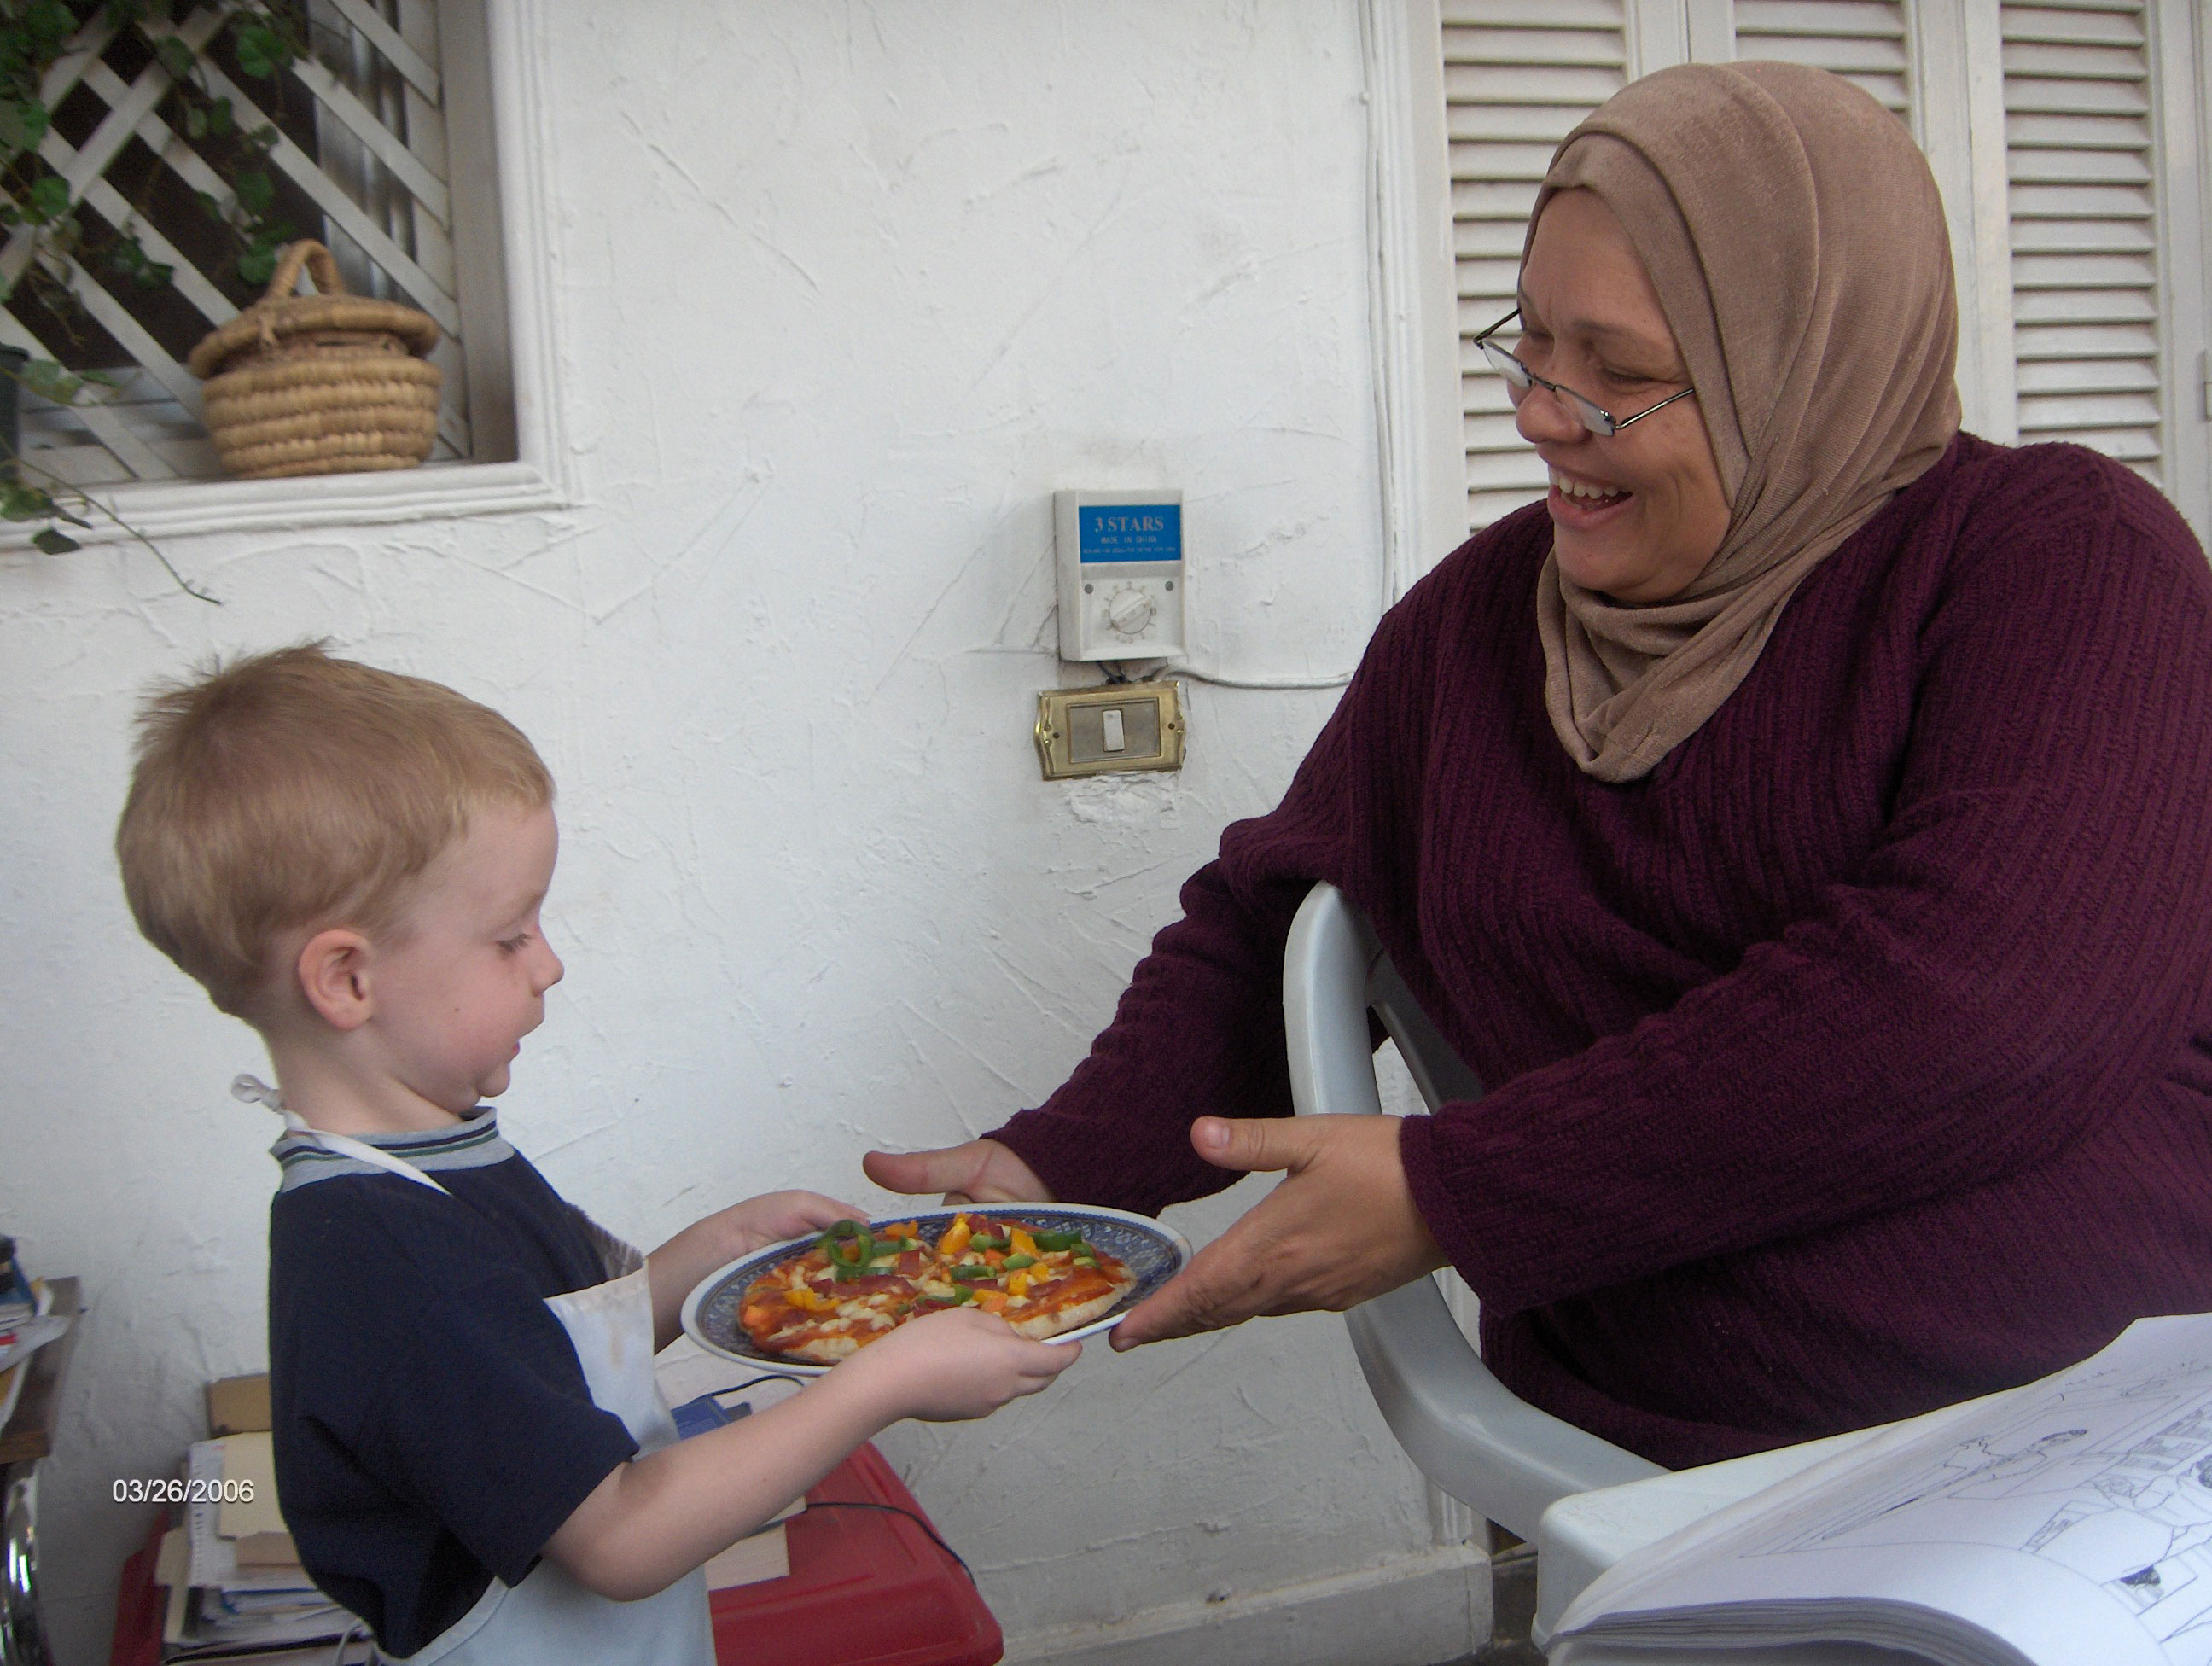 Christopher serving pizza to Ashgaan, our Arabic tutor, on our balcony